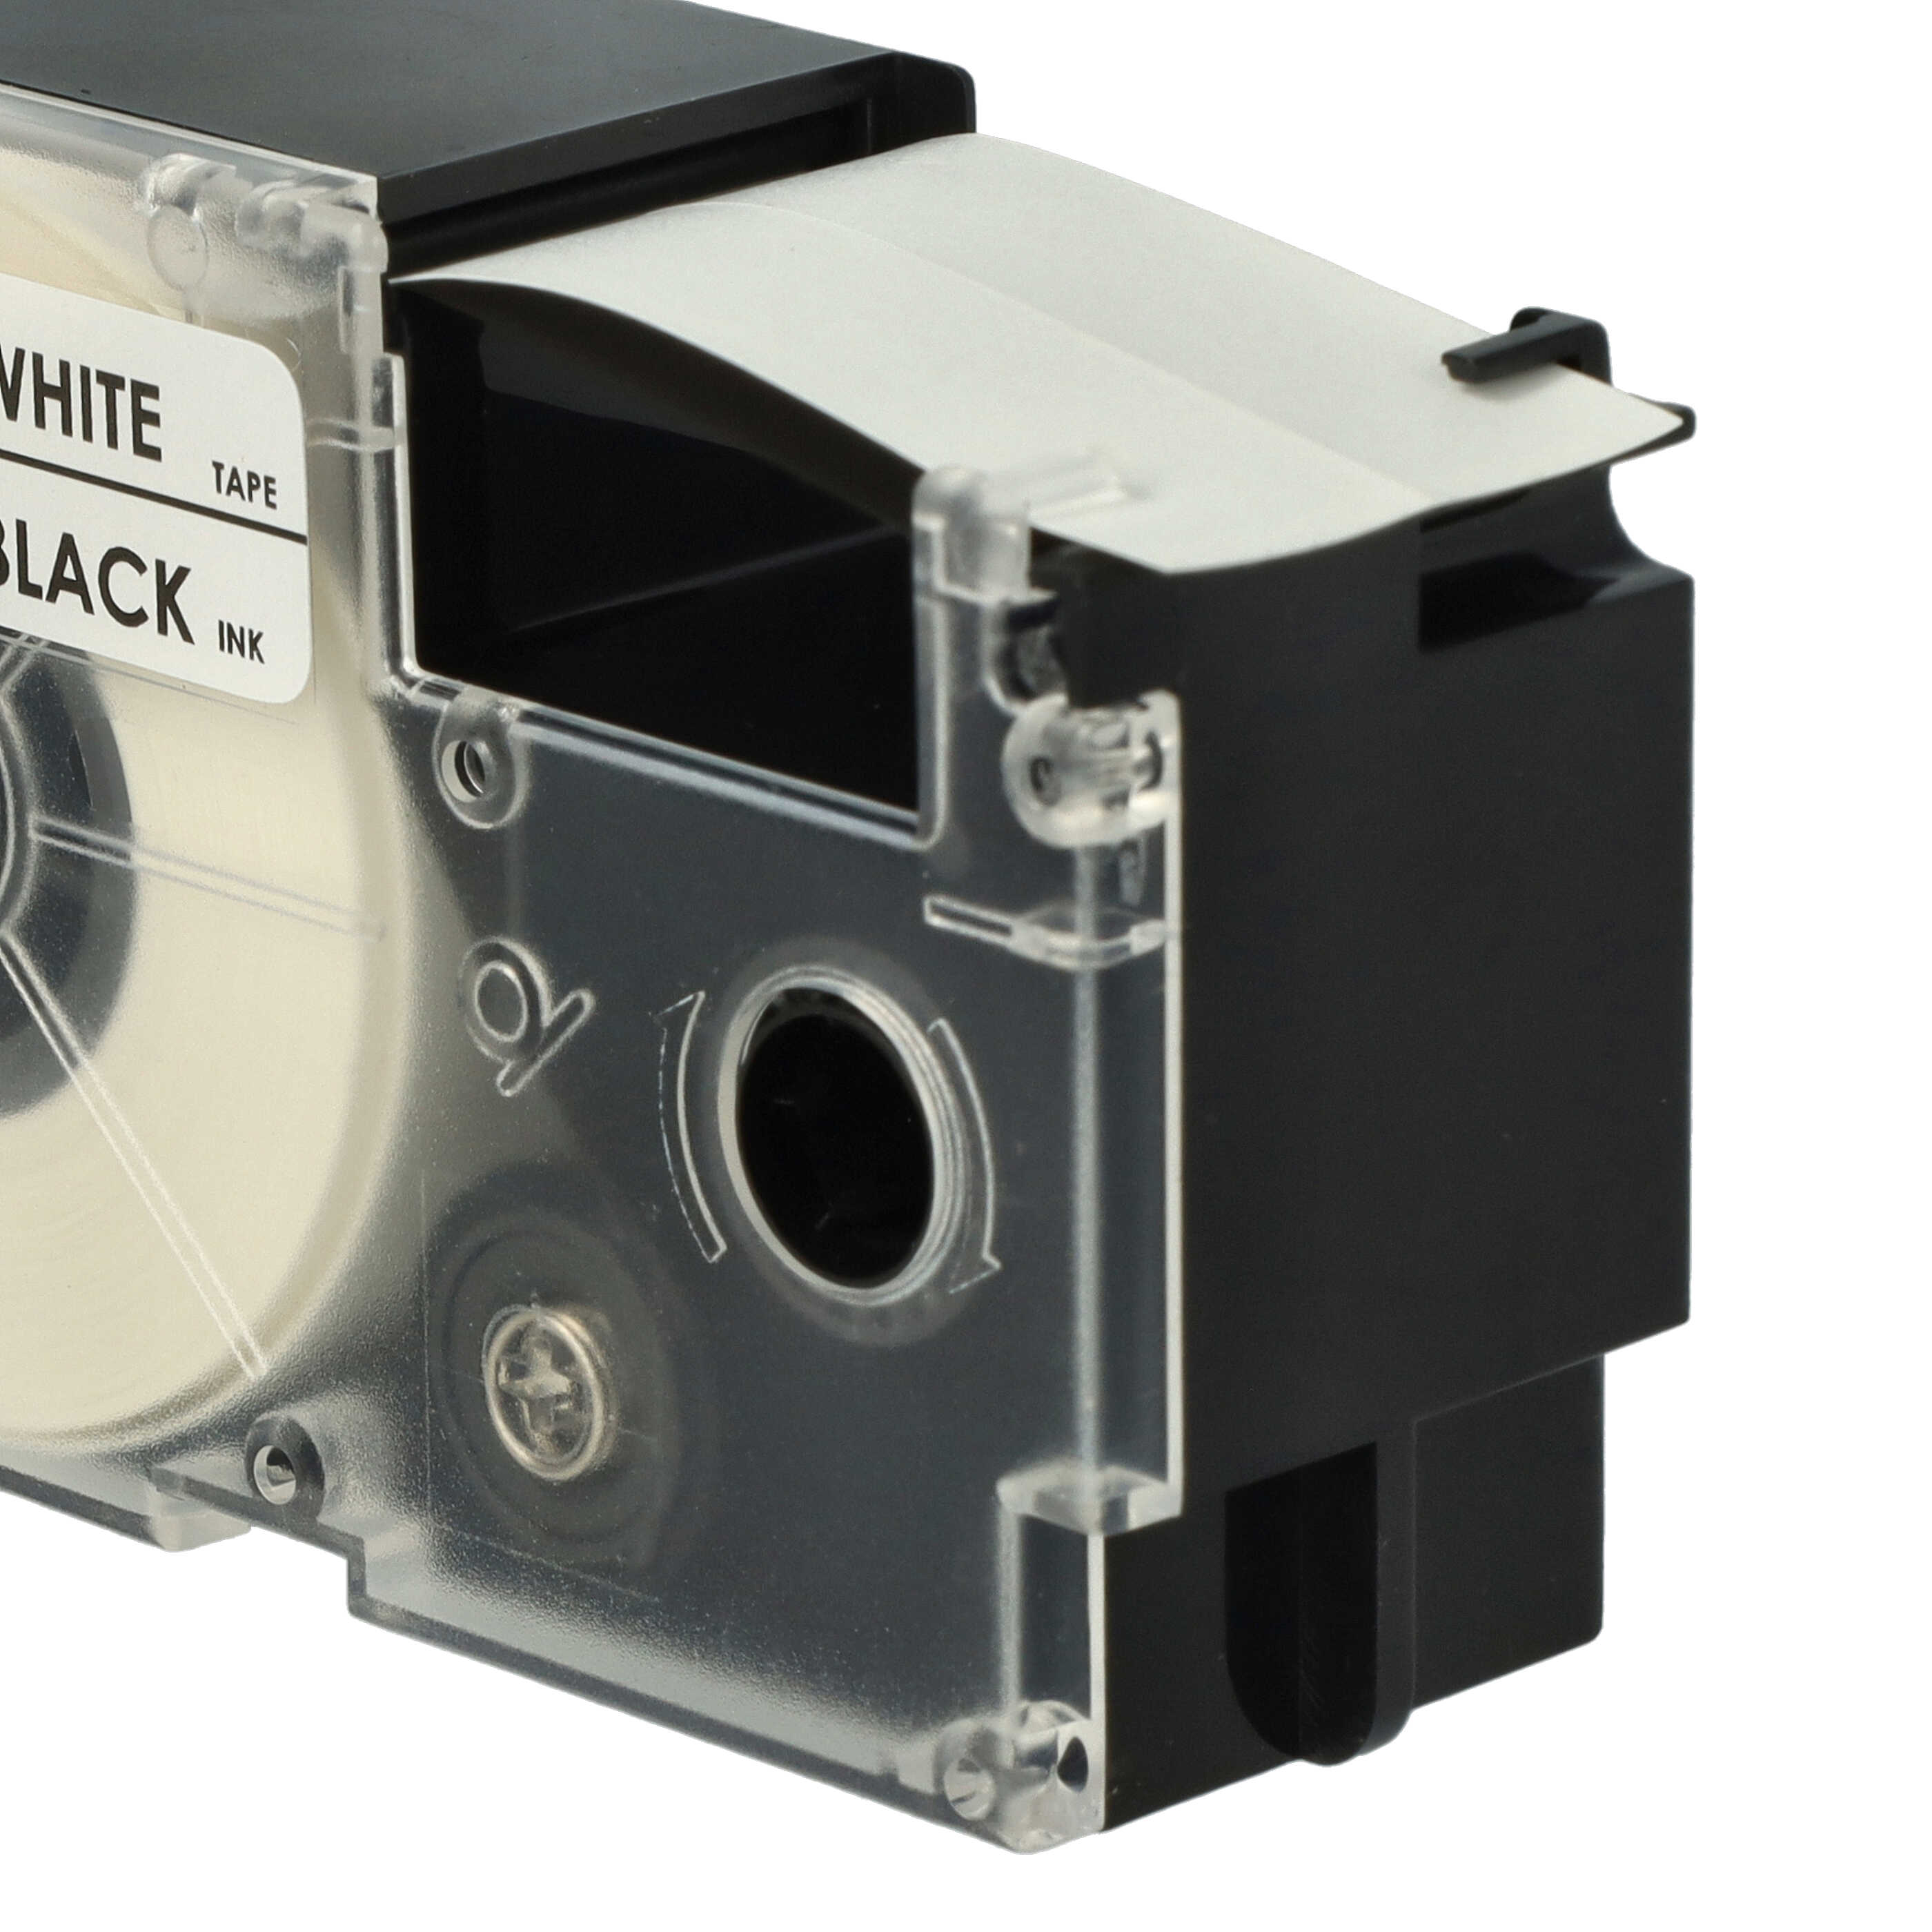 3x Label Tape as Replacement for Casio XR-24WE1, XR-24WE - 24 mm Black to White